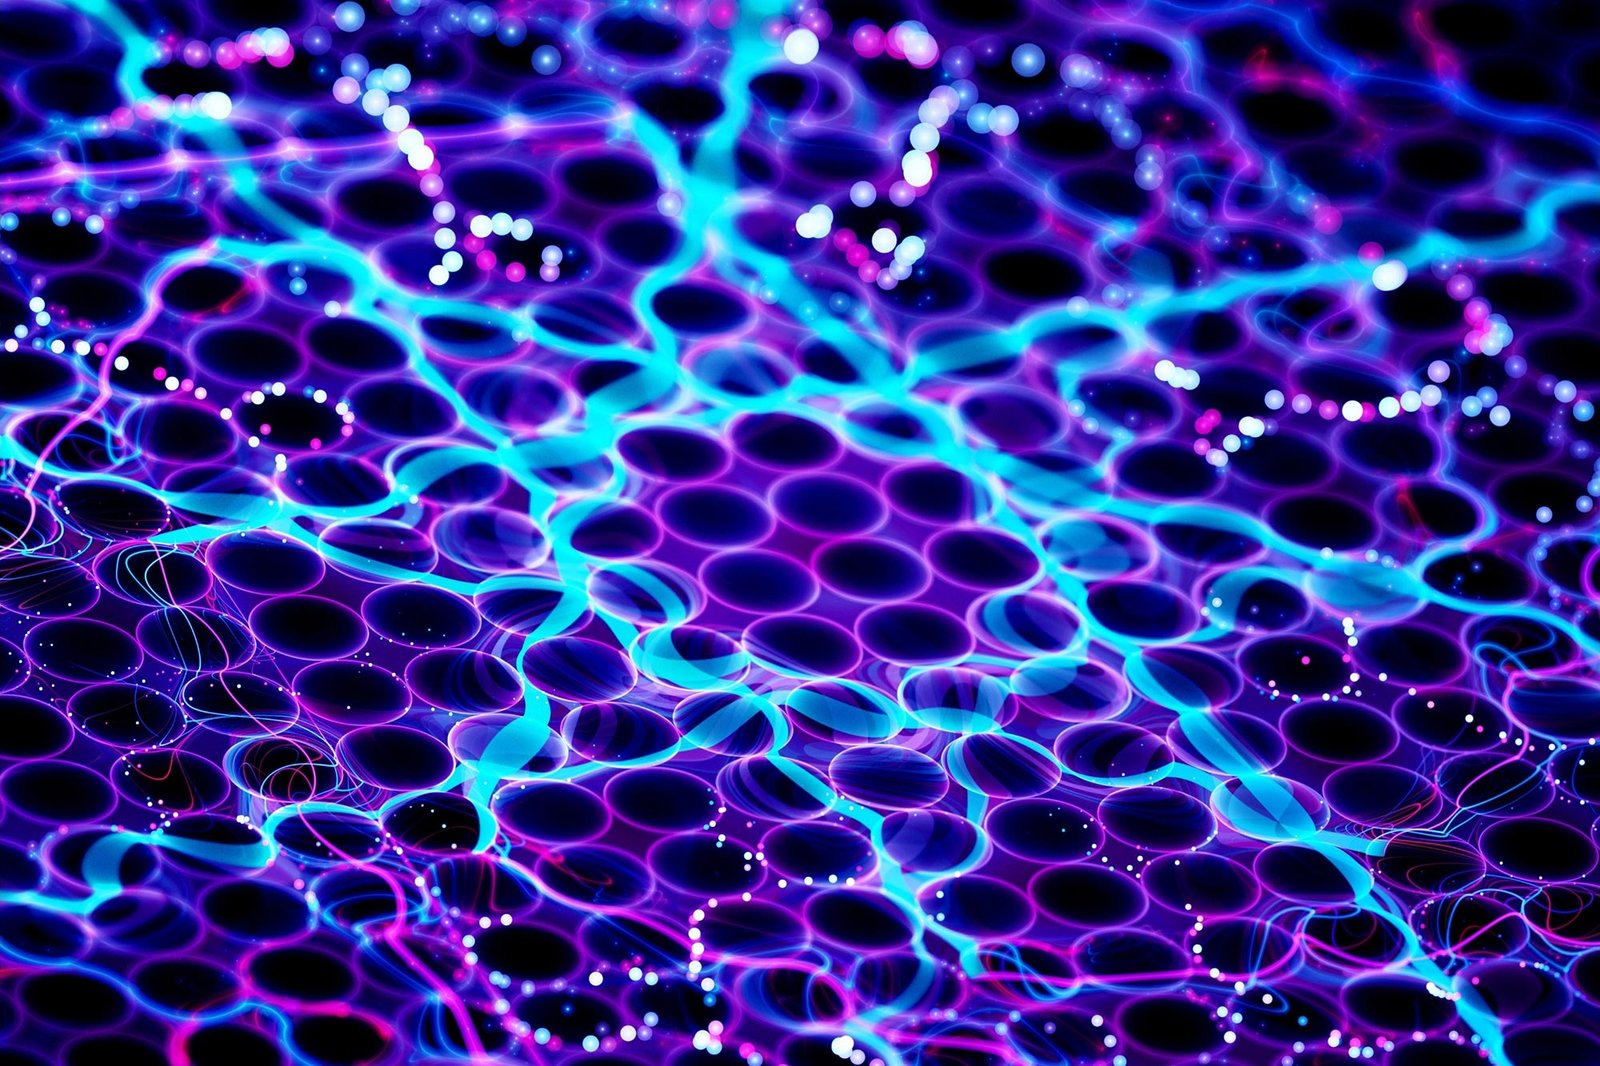 New “Better Than Graphene” Material Could Transform Implantable Technology